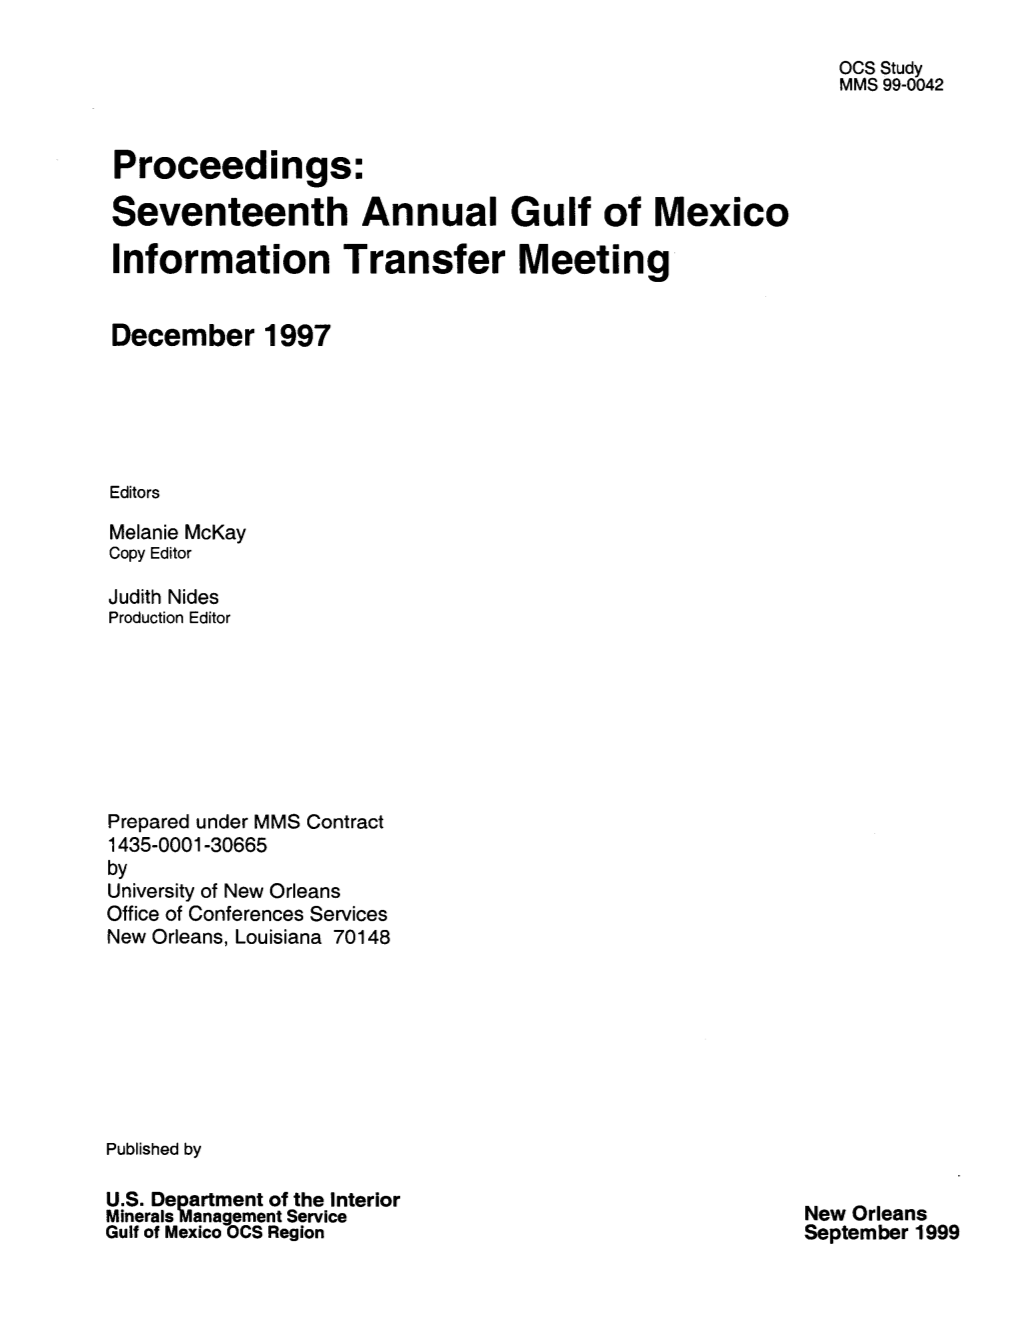 Seventeenth Annual Gulf of Mexico Information Transfer Meeting